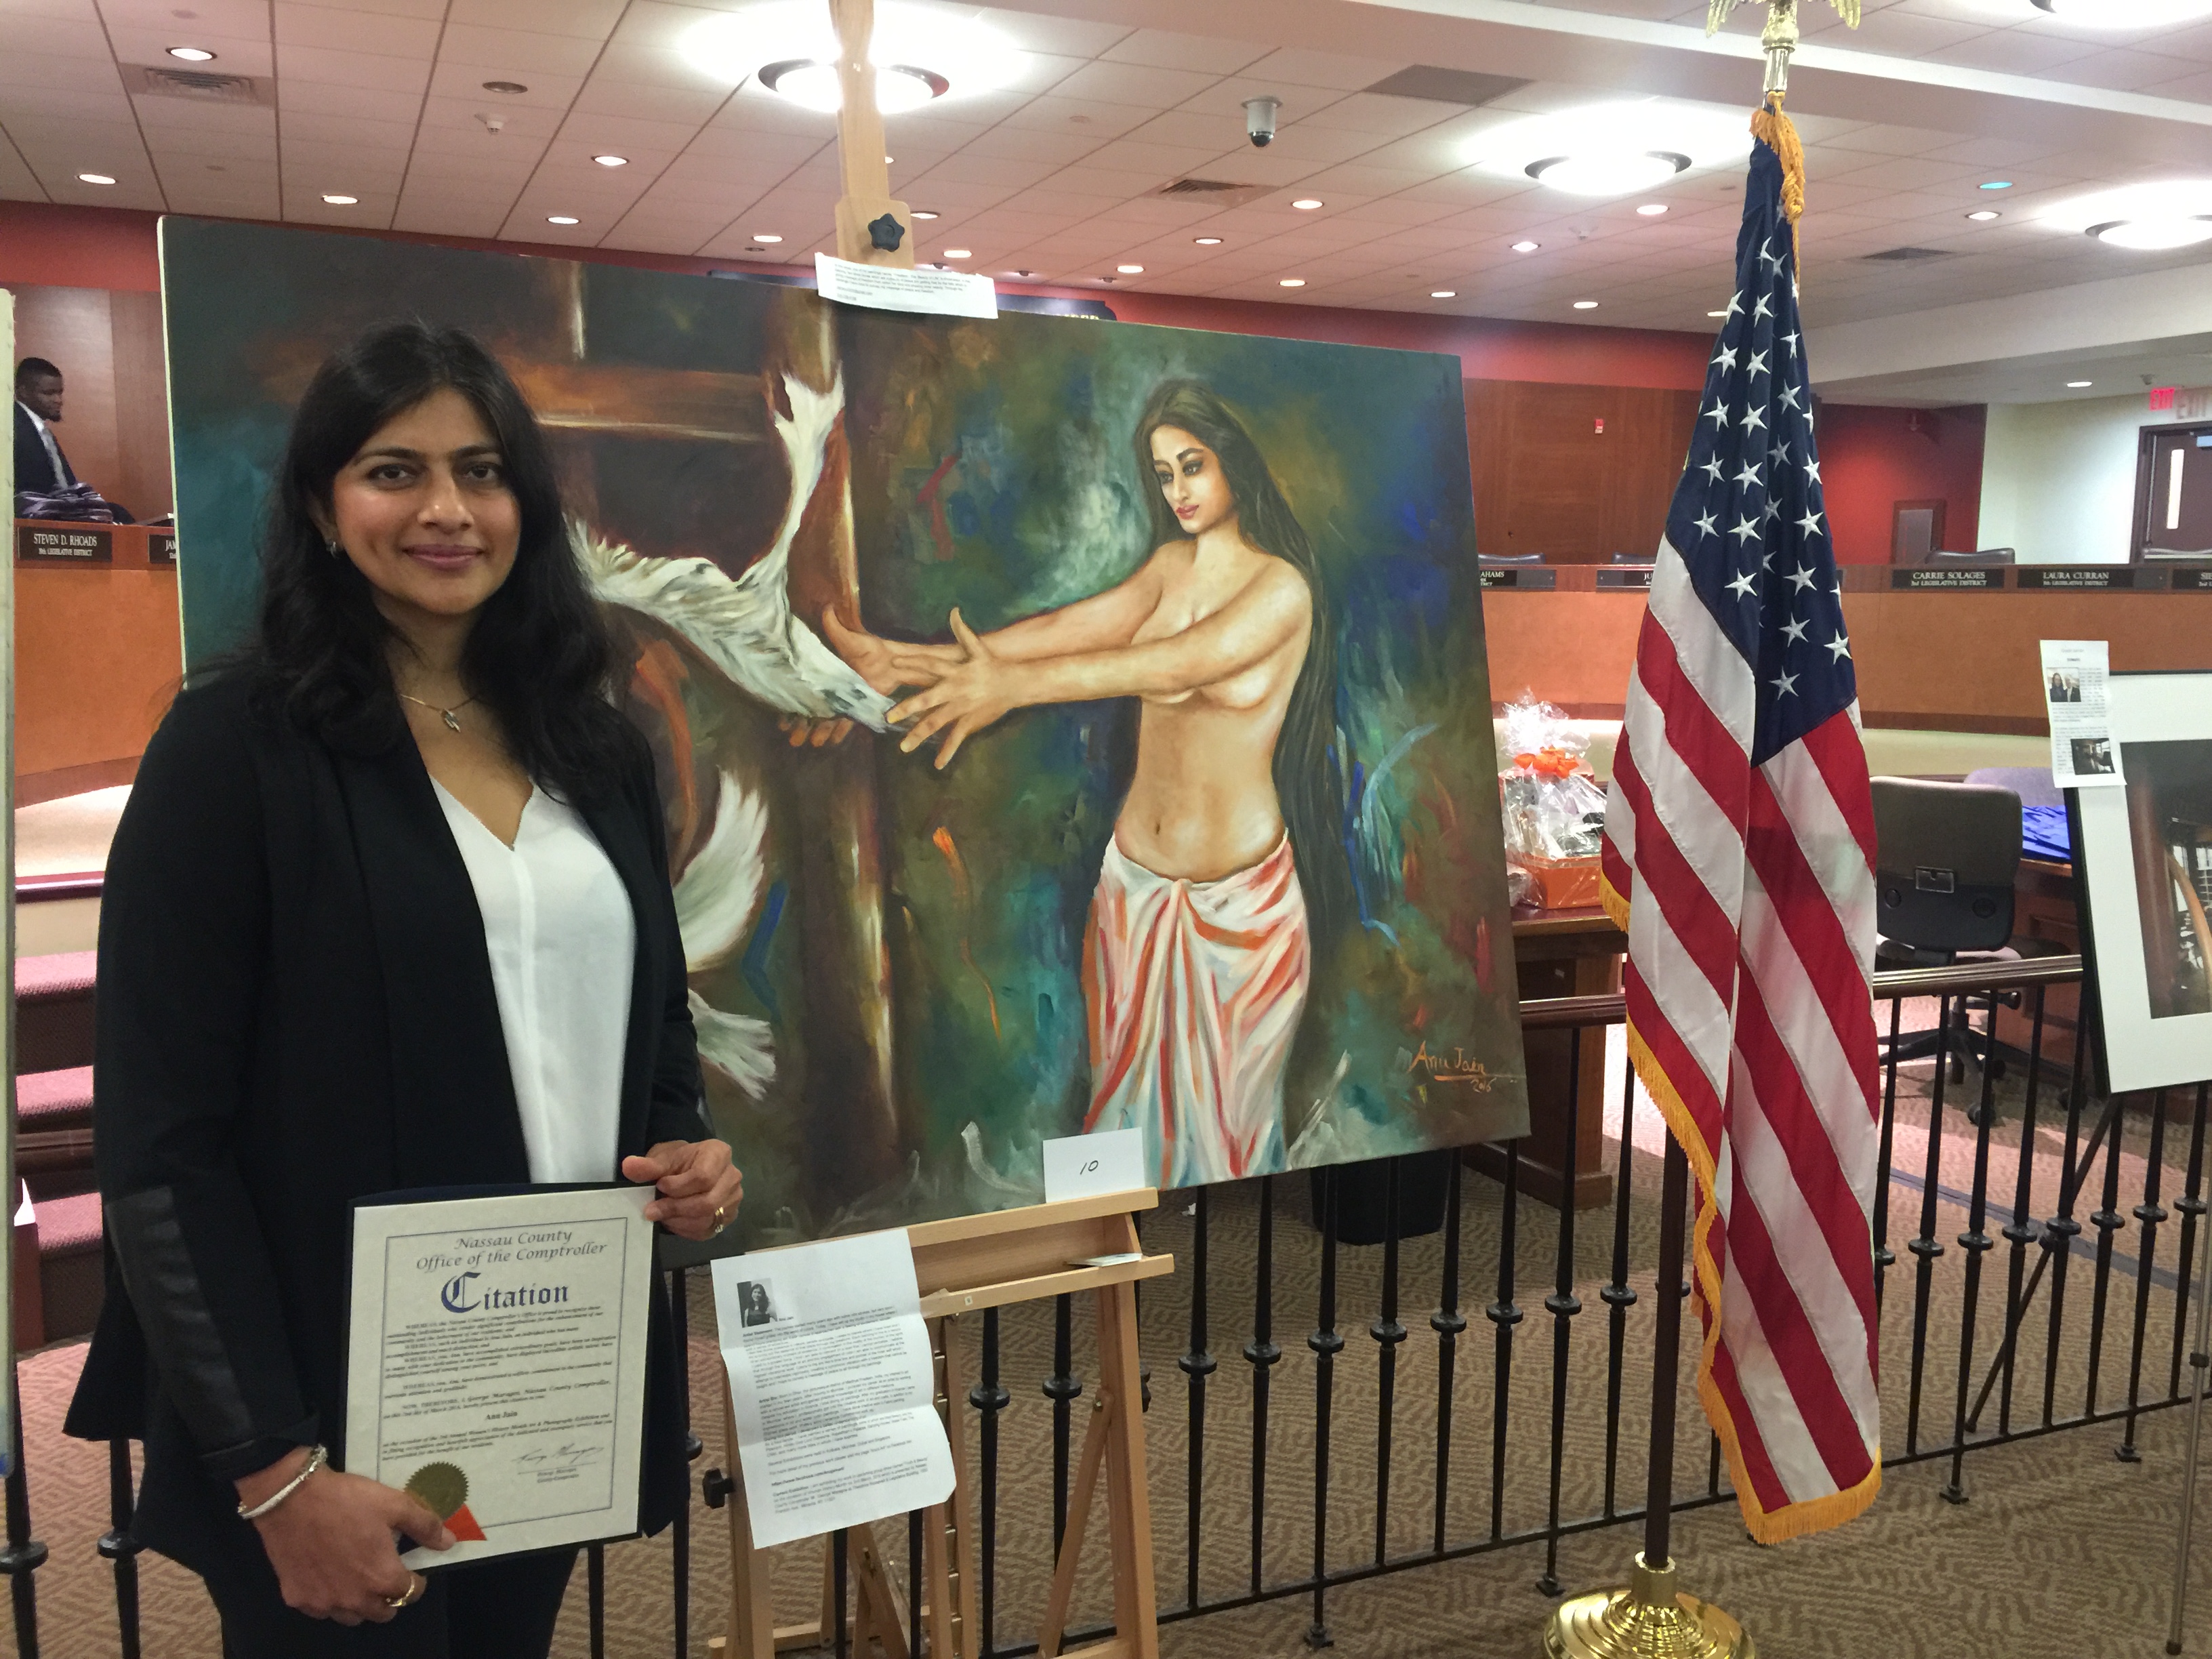 Anu Jain poses with her award in front of her entries in the exhibition